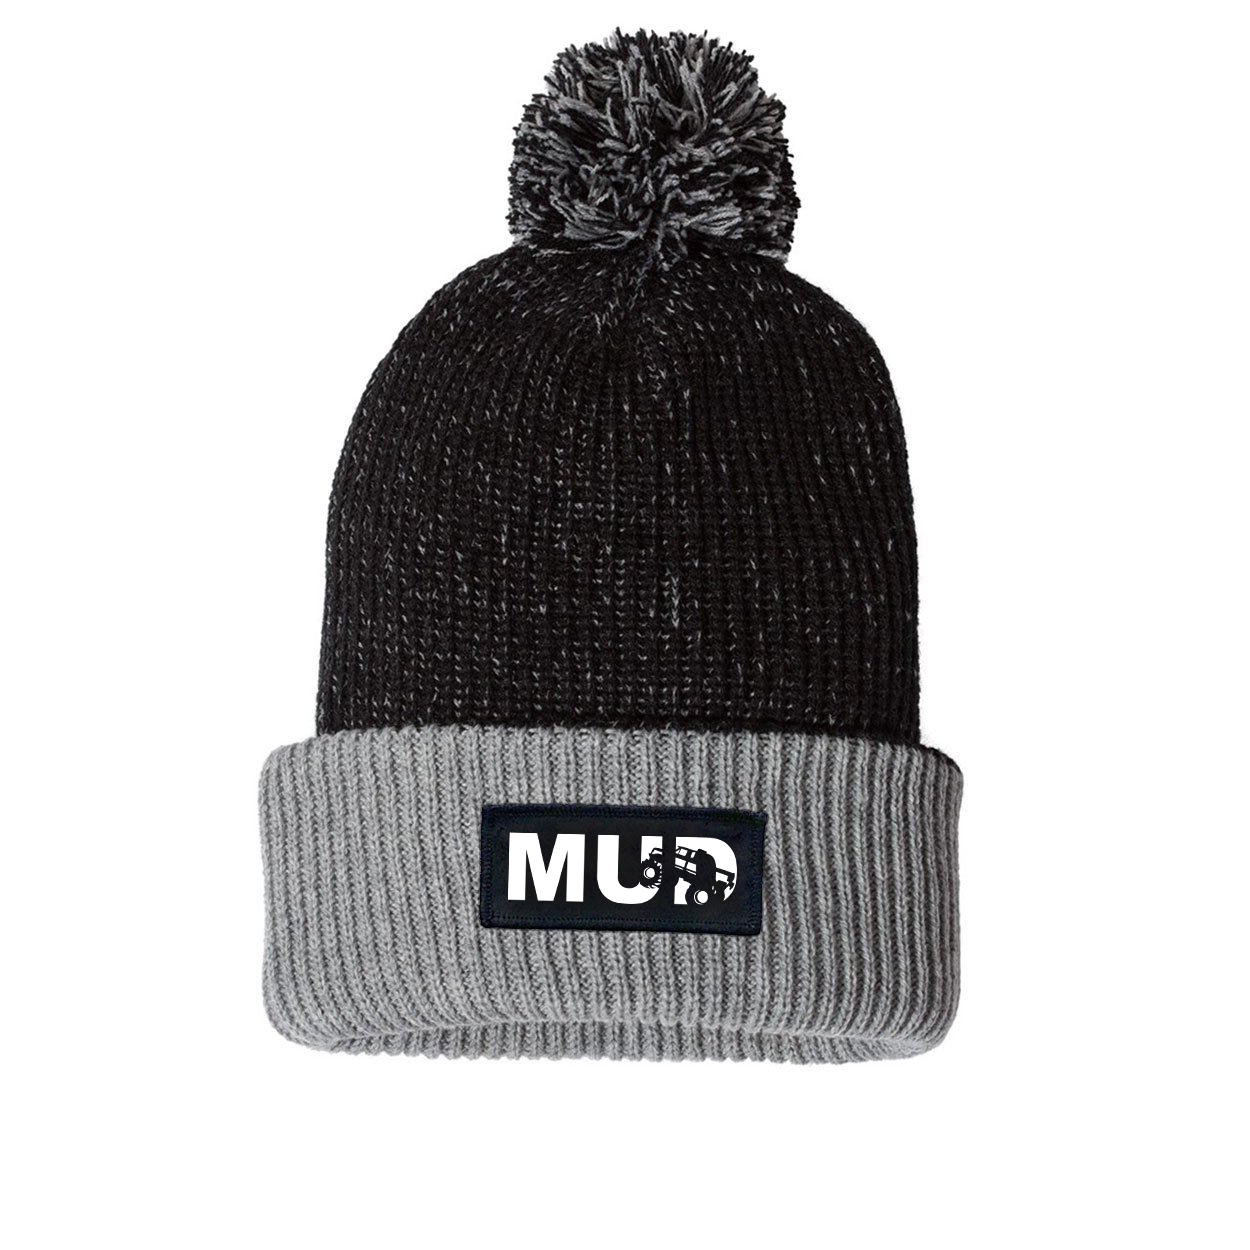 Mud Truck Logo Night Out Woven Patch Roll Up Pom Knit Beanie Black/Gray (White Logo)